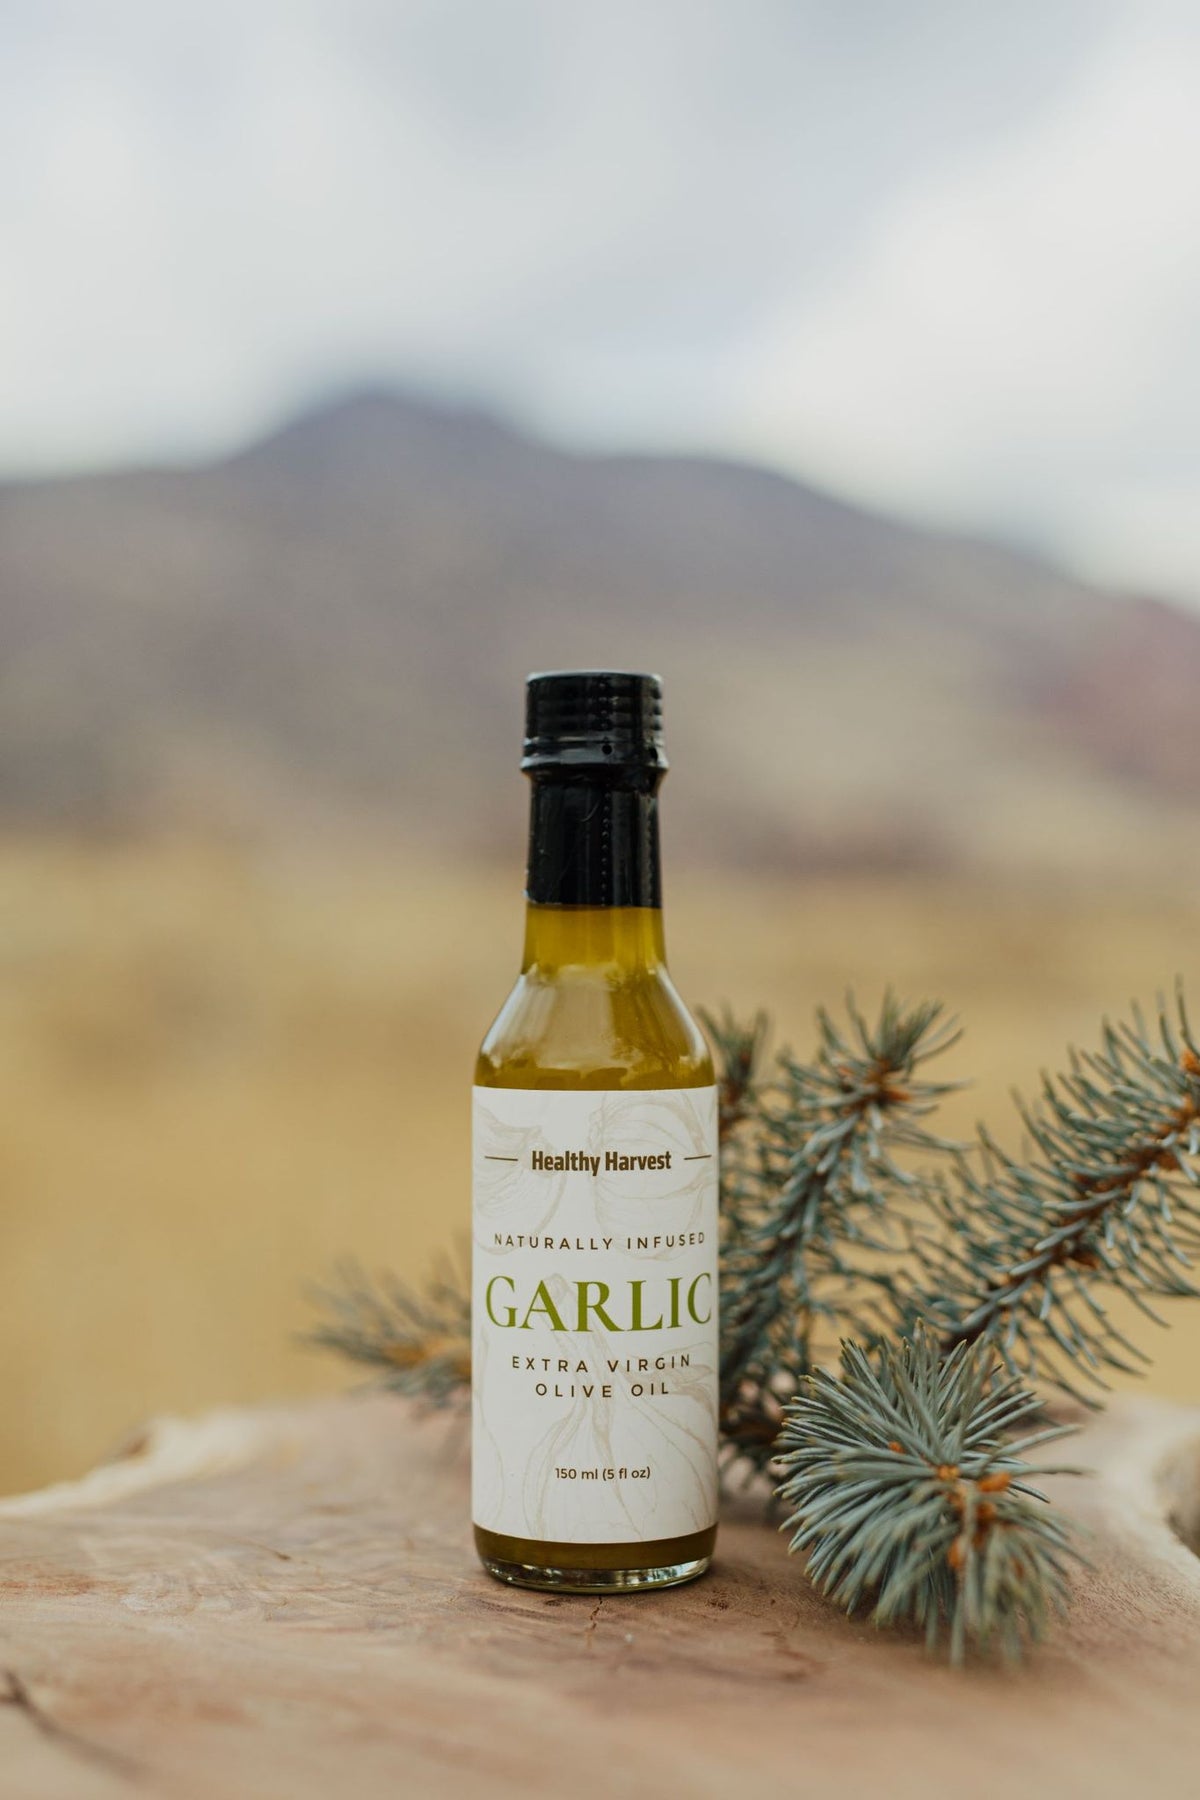 5 oz bottle of Garlic Infused Healthy Harvest Olive Oil photographed with a spring of pine and in the foreground of a mountain landscape